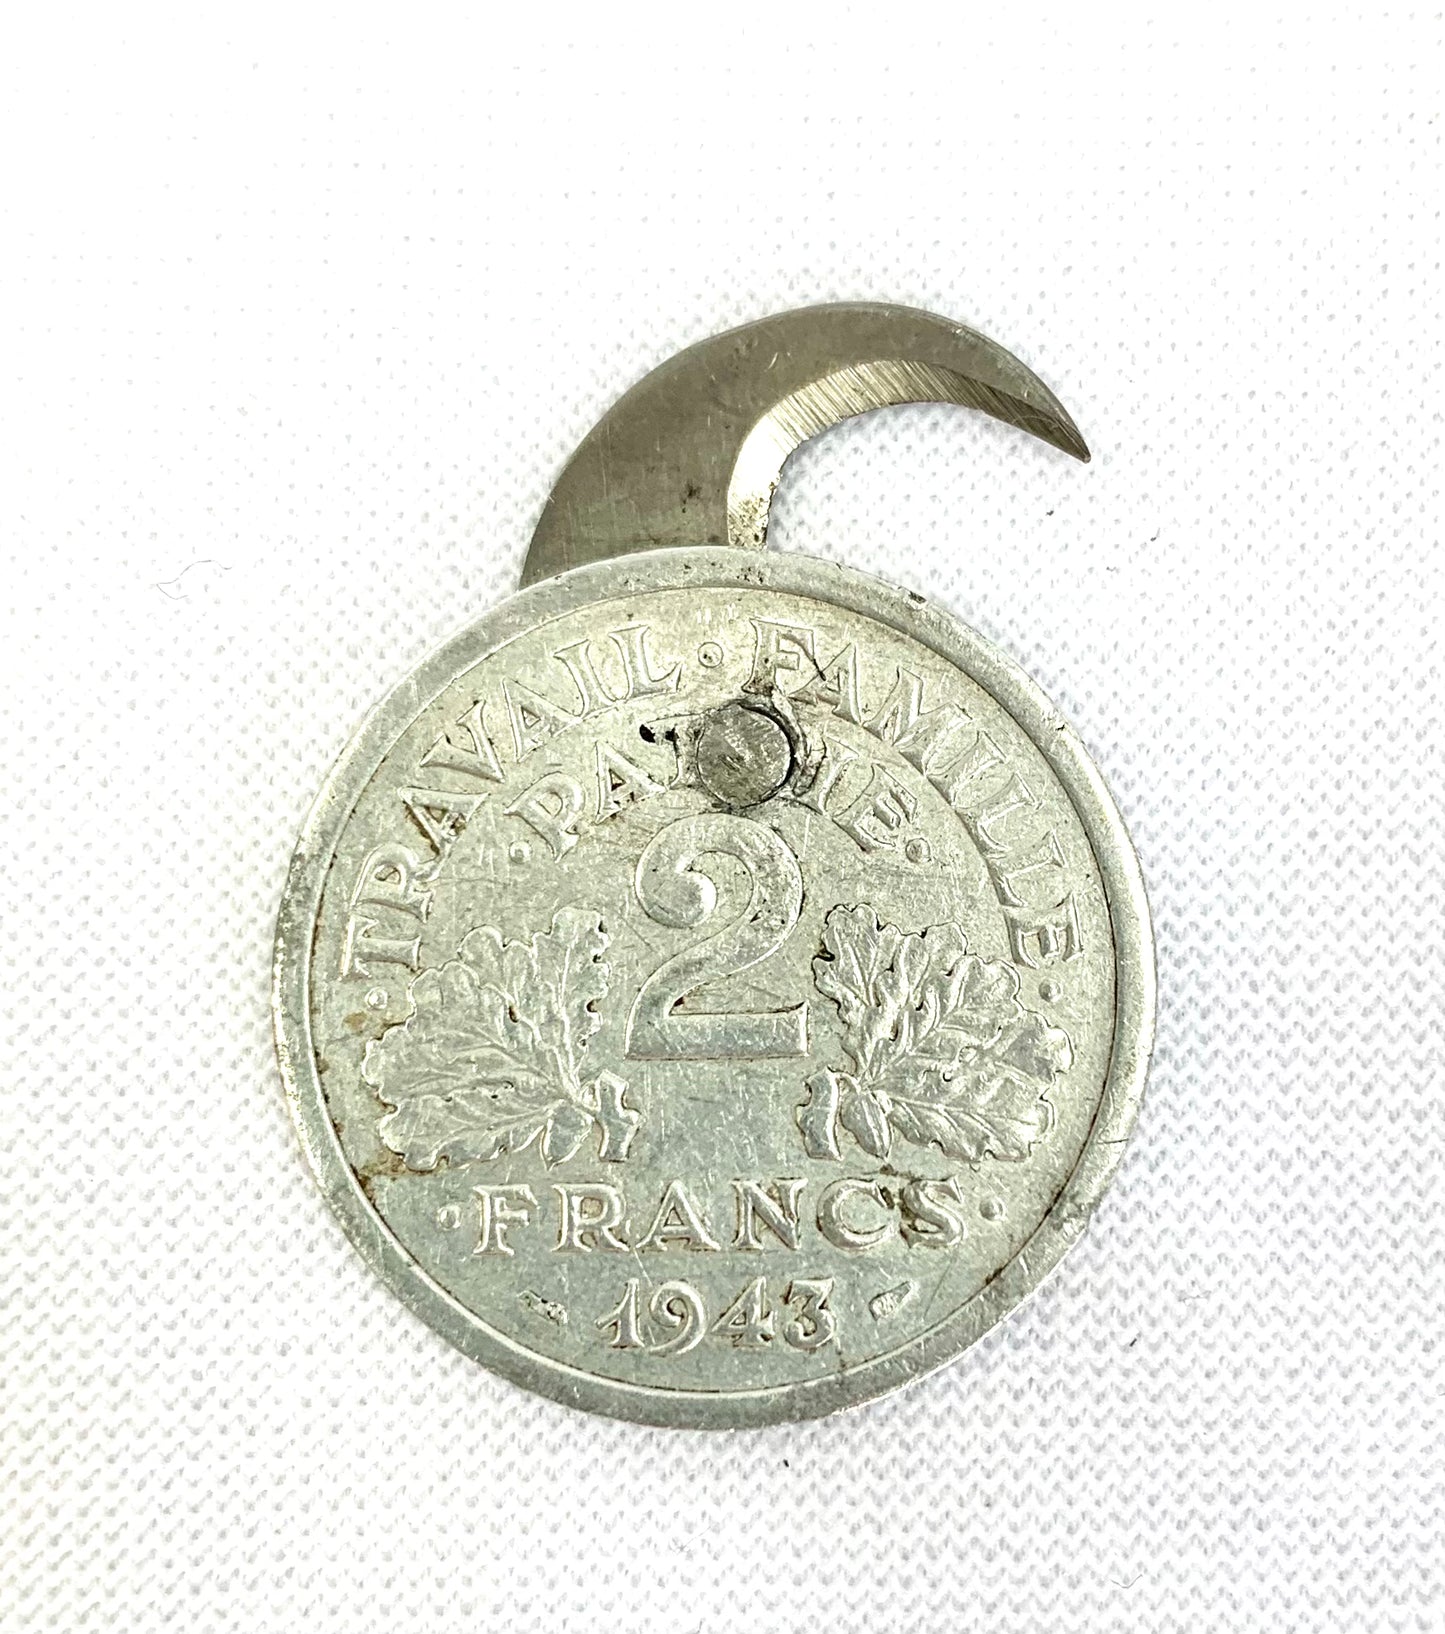 WW2 SOE French 2 Franc Coin with Concealed Blade. Dated 1943